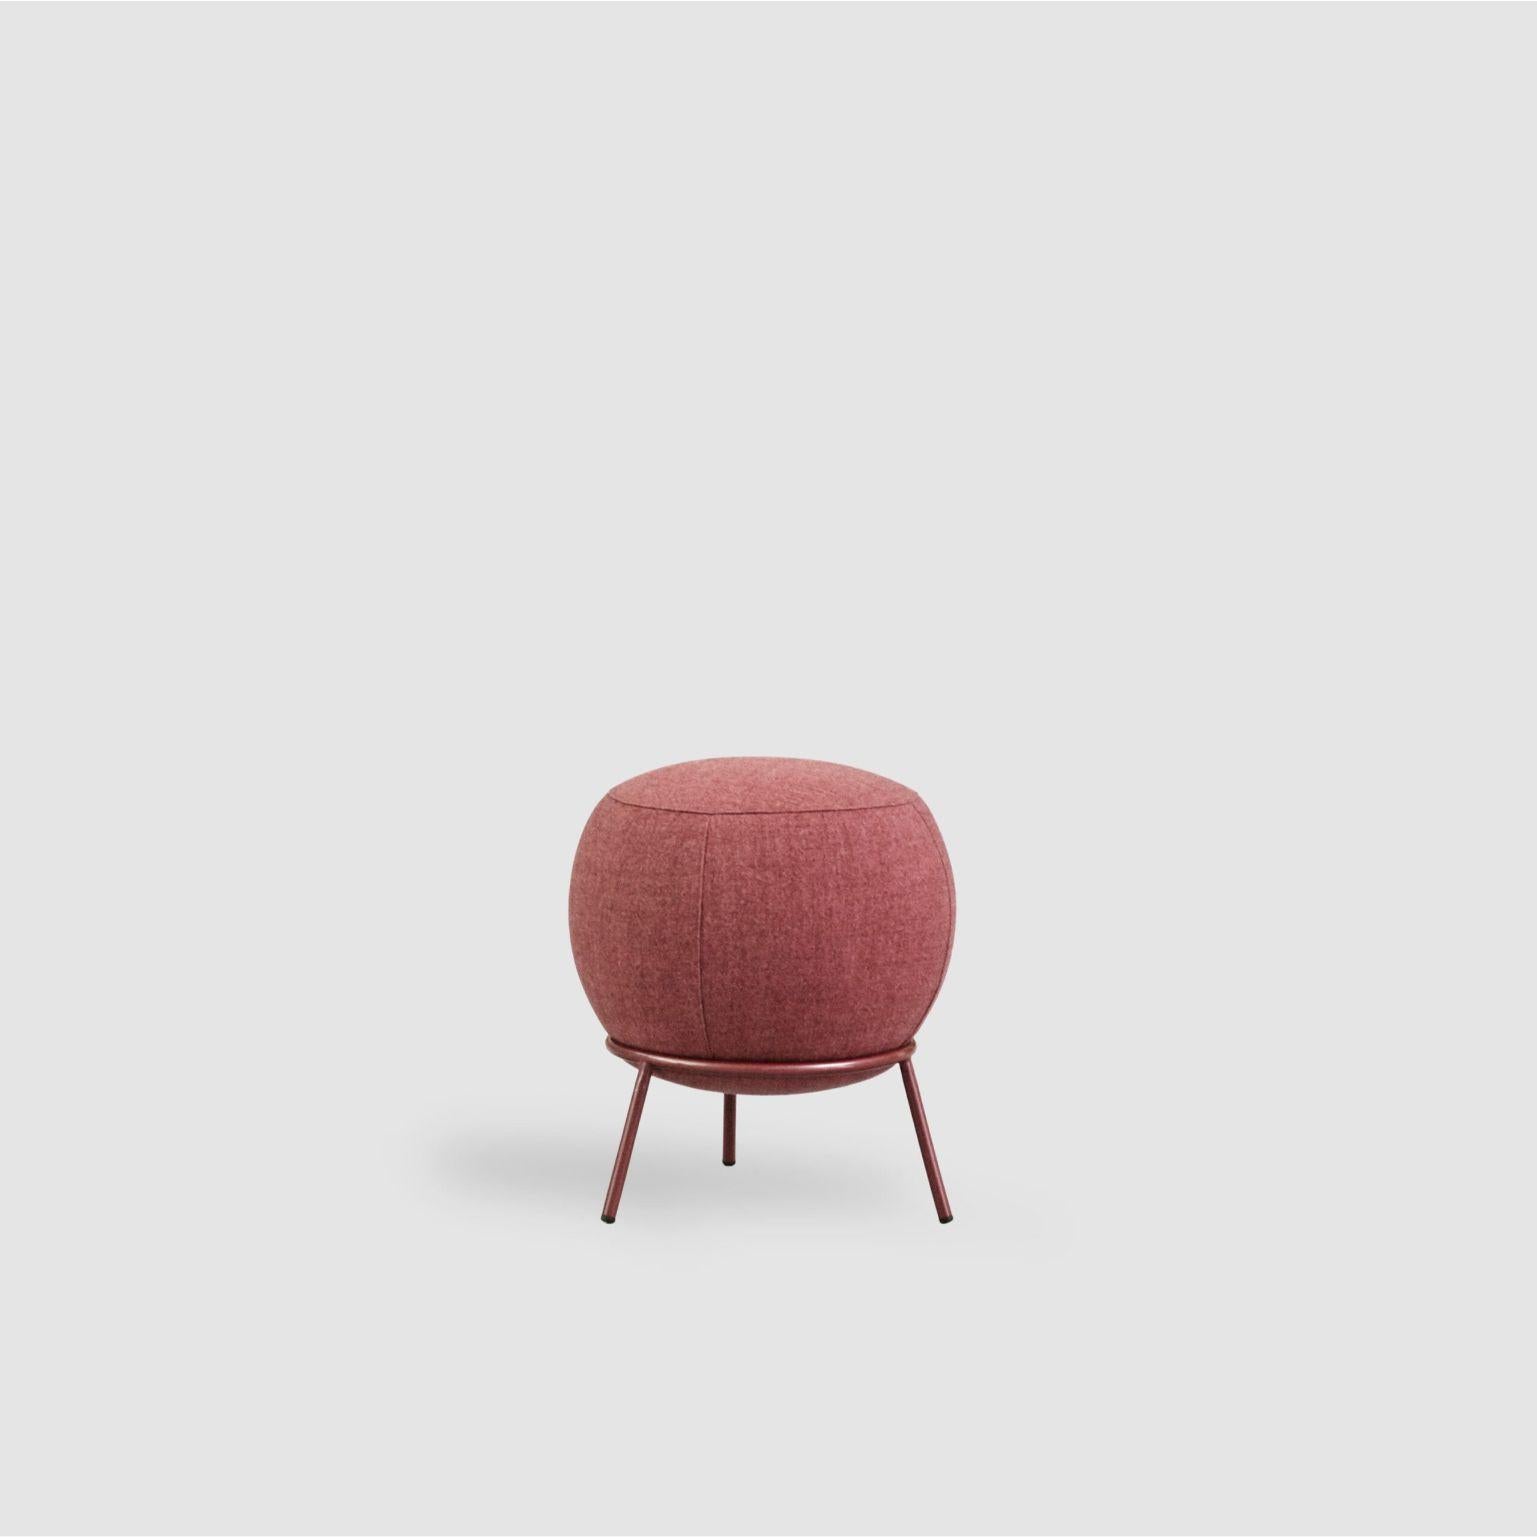 Nest ottoman - red by Paula Rosales
Dimensions: W42, D42, H43
Materials: Iron structure and MDF board
Foam CMHR (high resilience and flame retardant) for all our cushion filling systems
Painted or chromed legs

Also available: Different